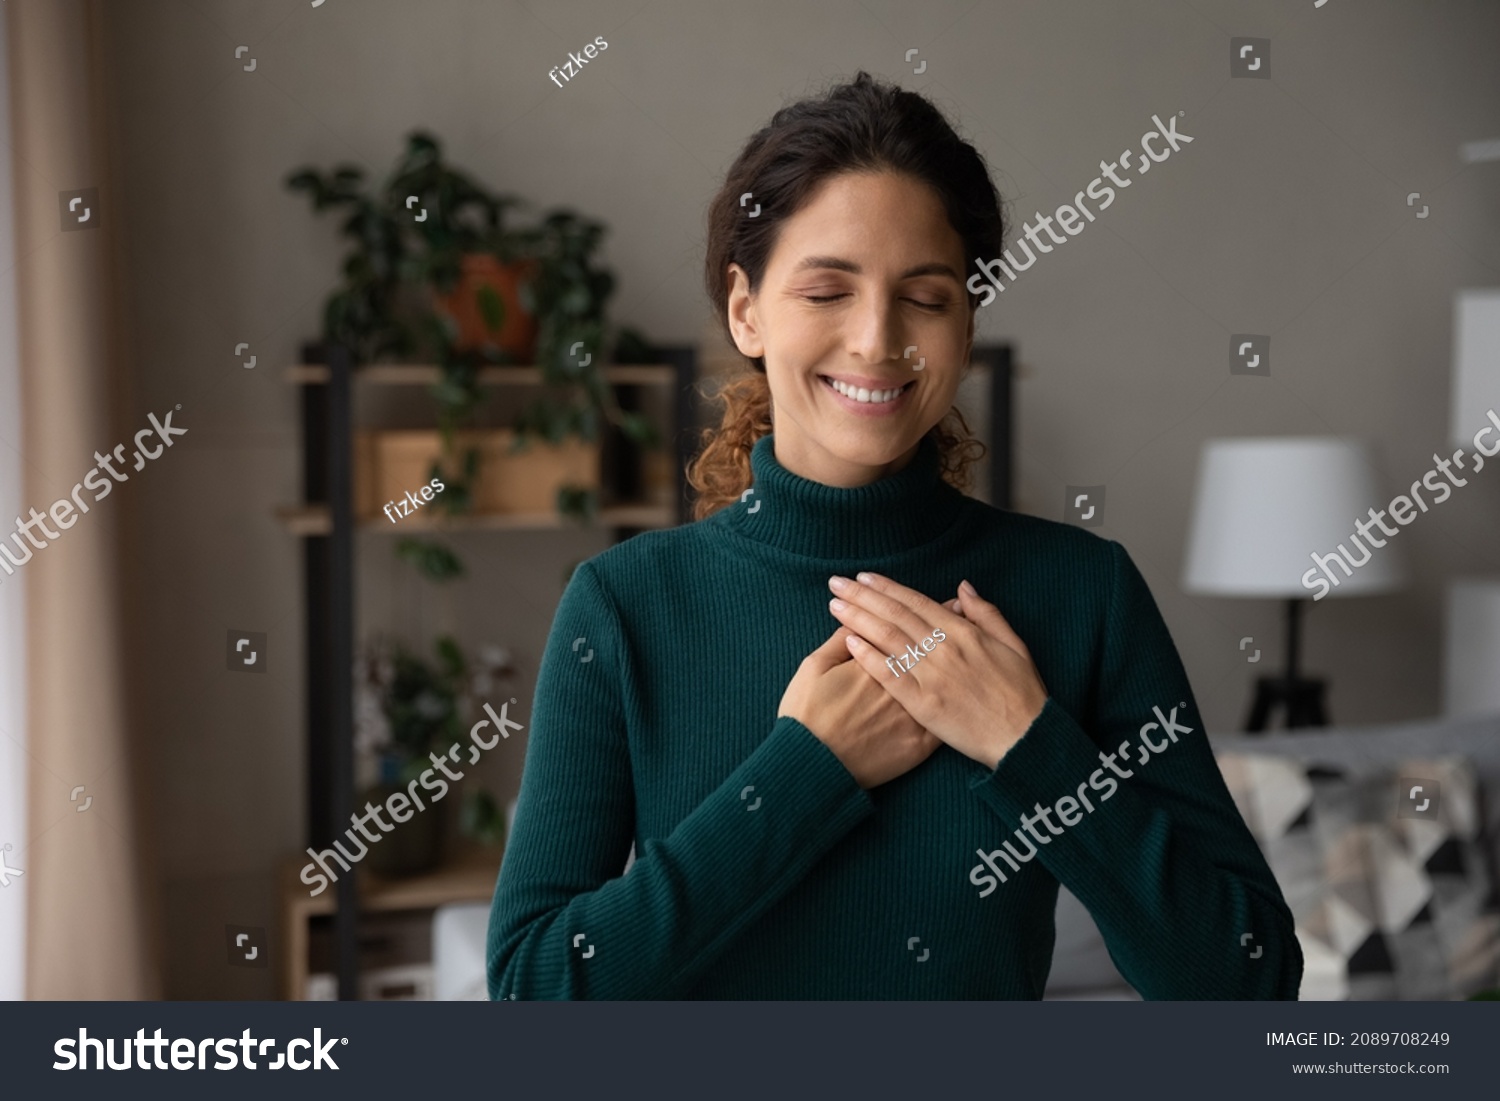 Smiling young Hispanic woman hold hands at heart chest feel grateful and thankful. Happy millennial Latino female believer show love and care support pray or mediate. Faith, superstition concept. #2089708249